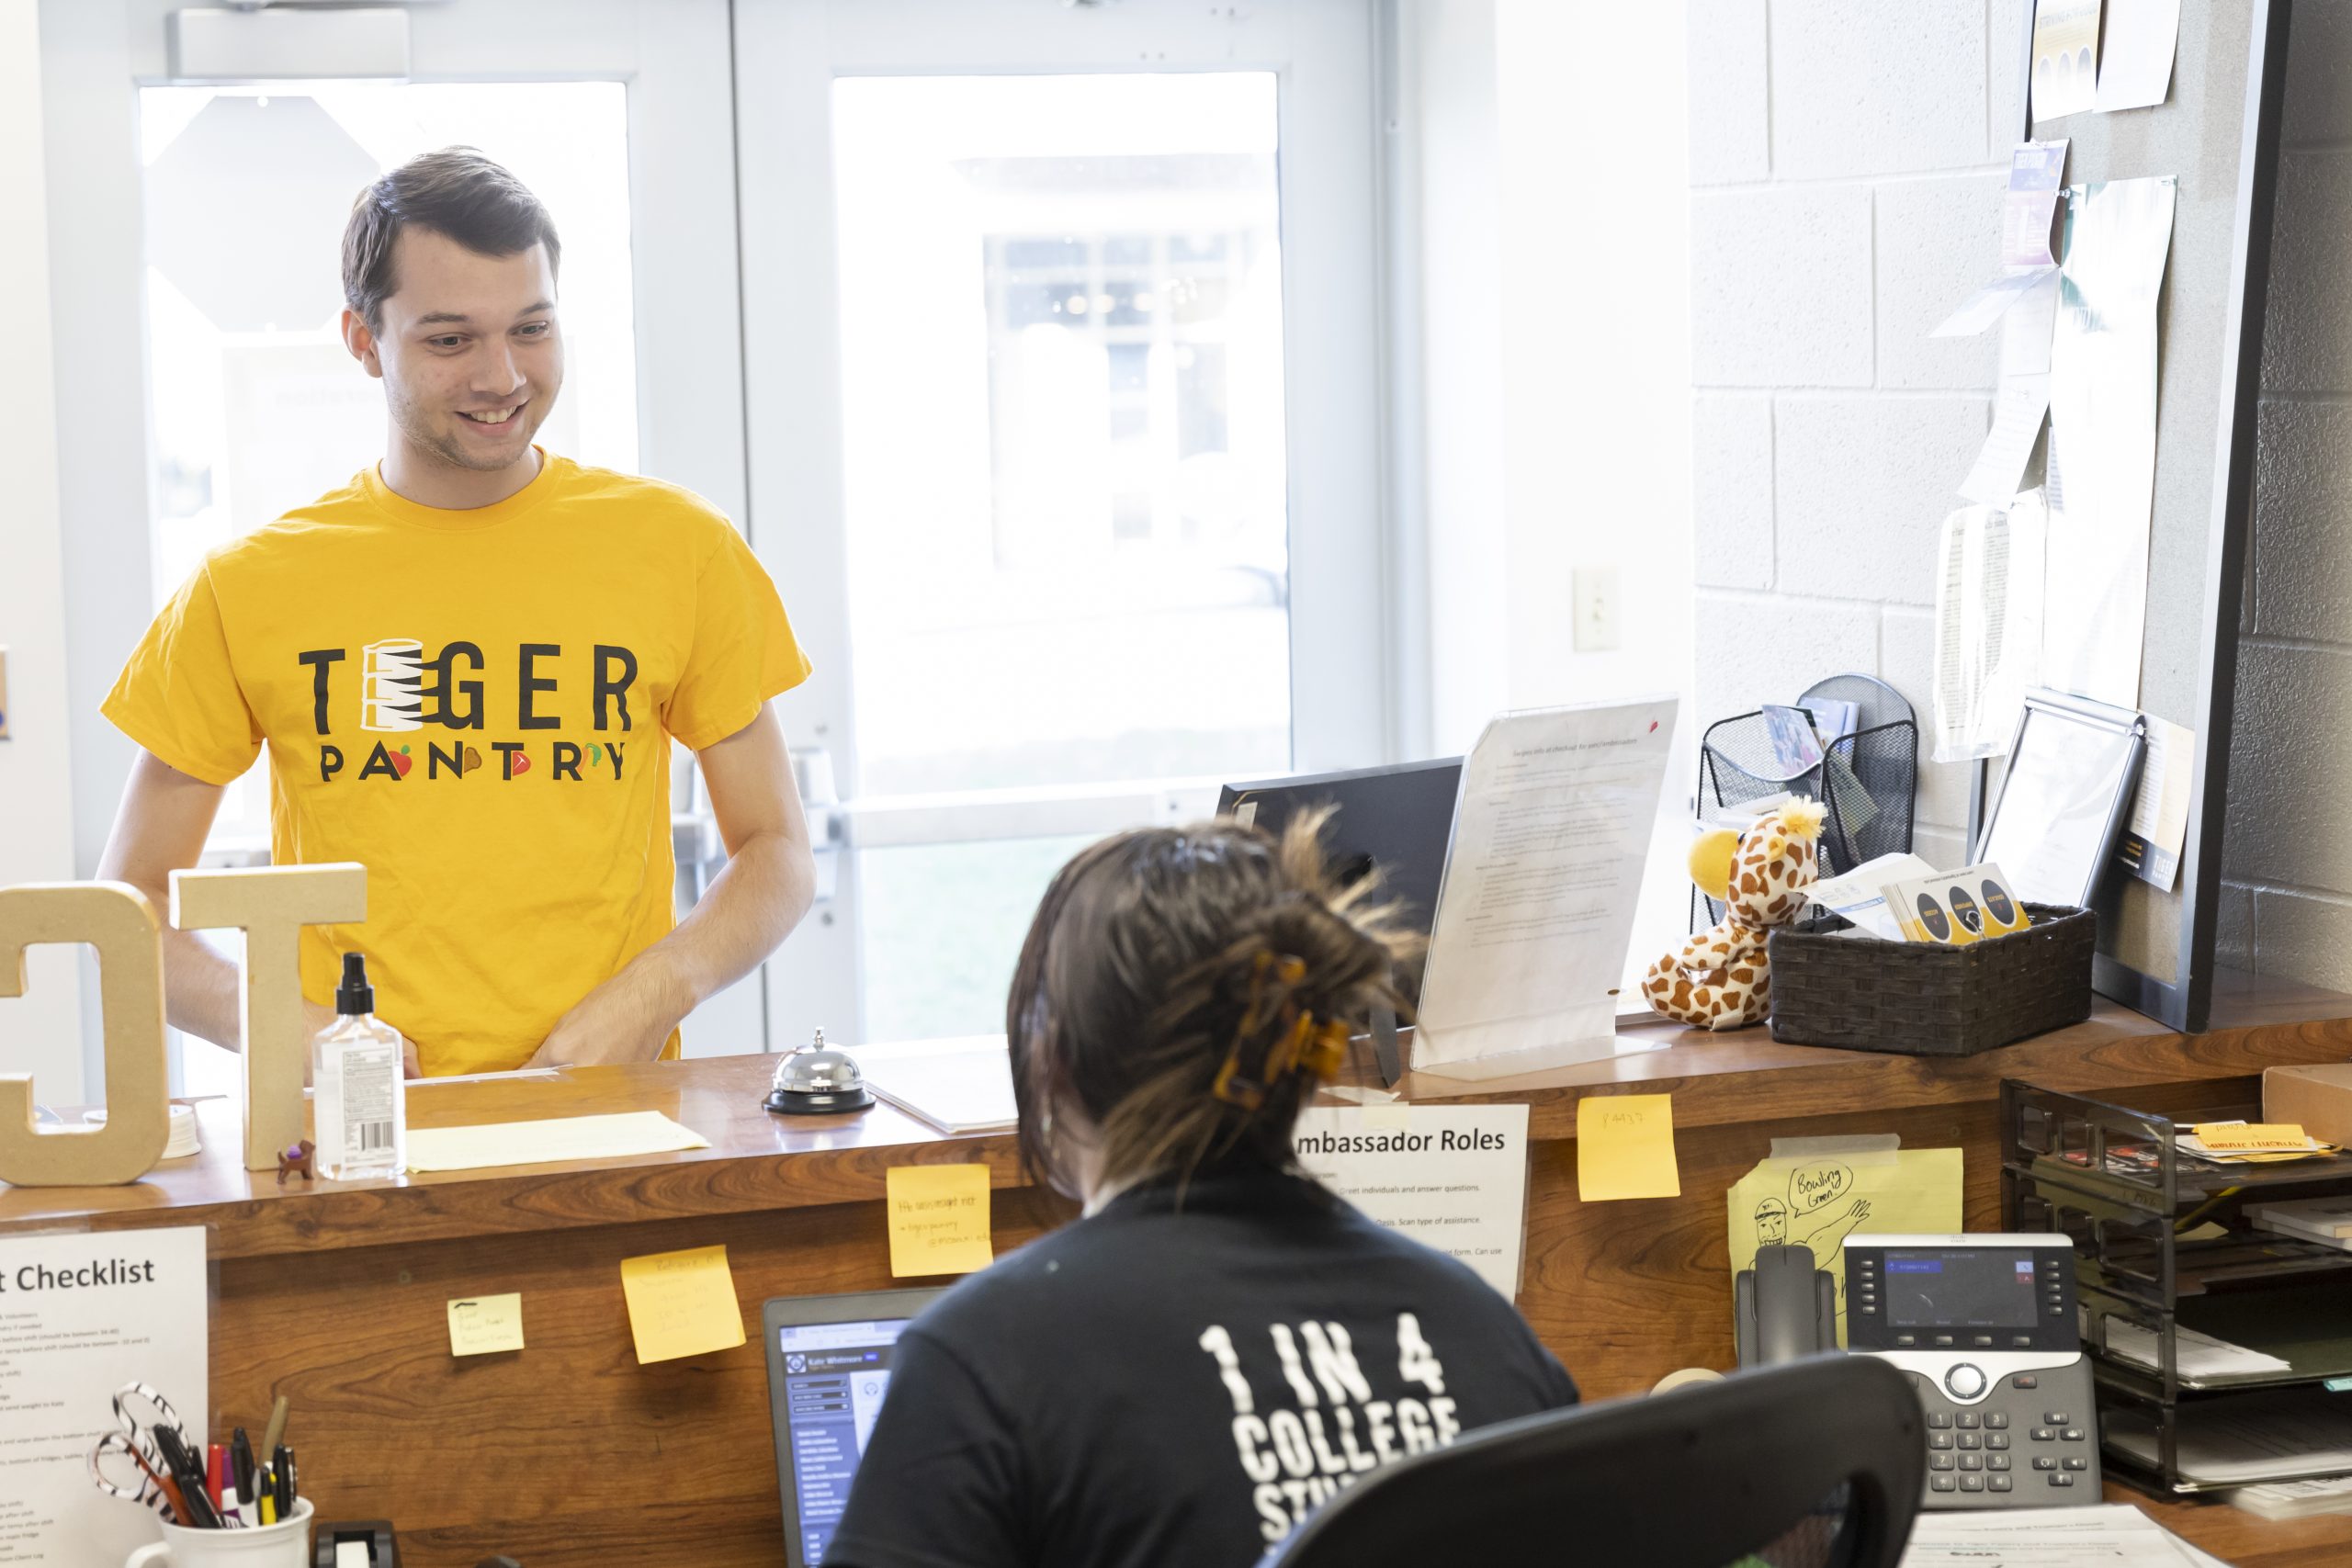 Student is welcomed at Tiger Pantry front desk